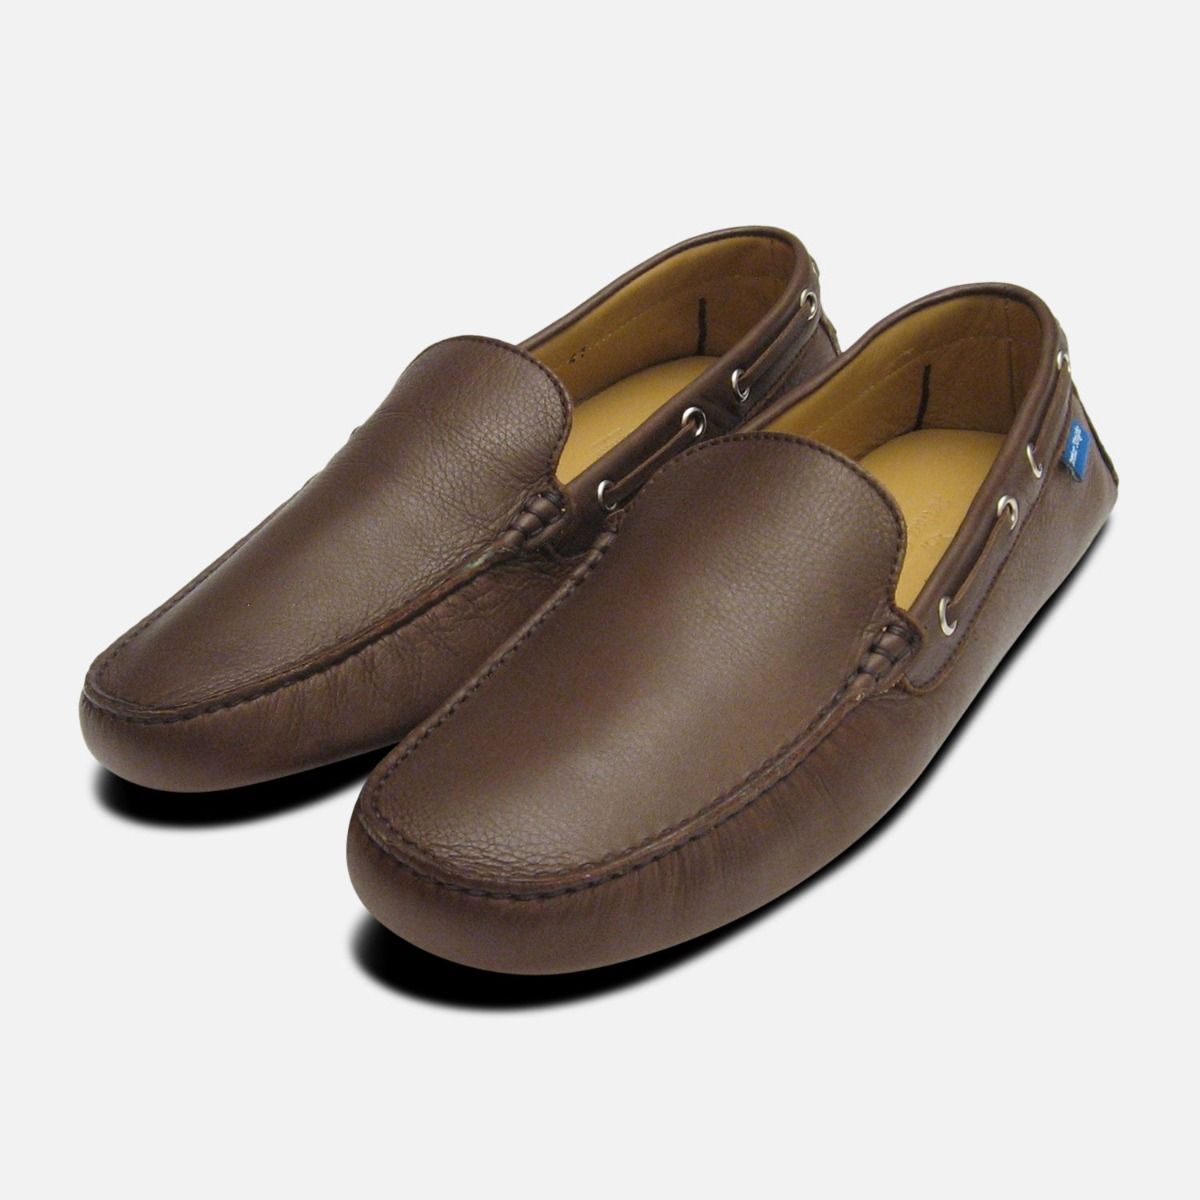 leather driving moccasins